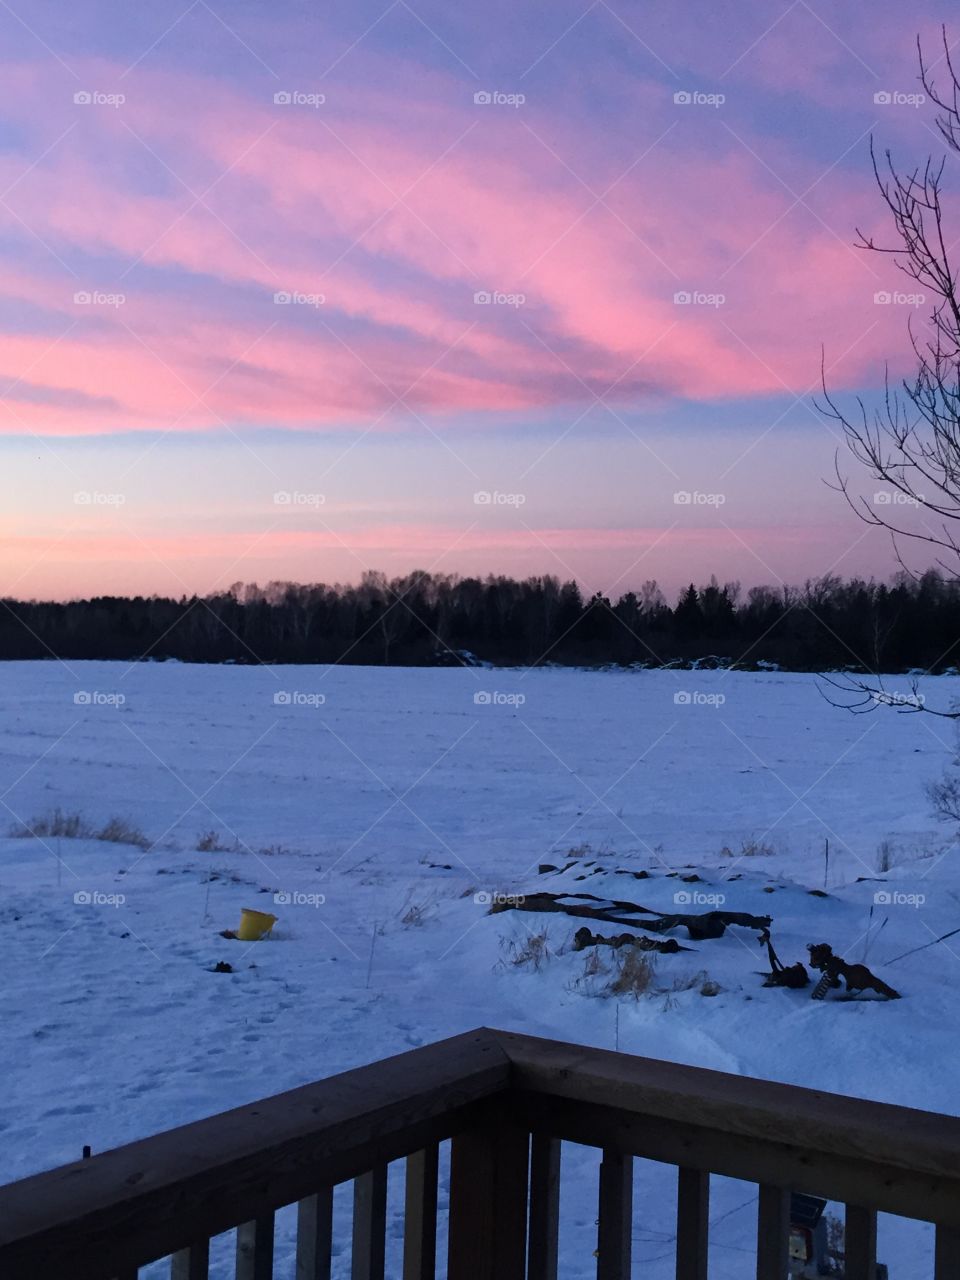 As evening falls Upon us the sky is laying a beautiful pink blanket over the newly fallen snow Tucking it in for the evening to Await a new dawn.